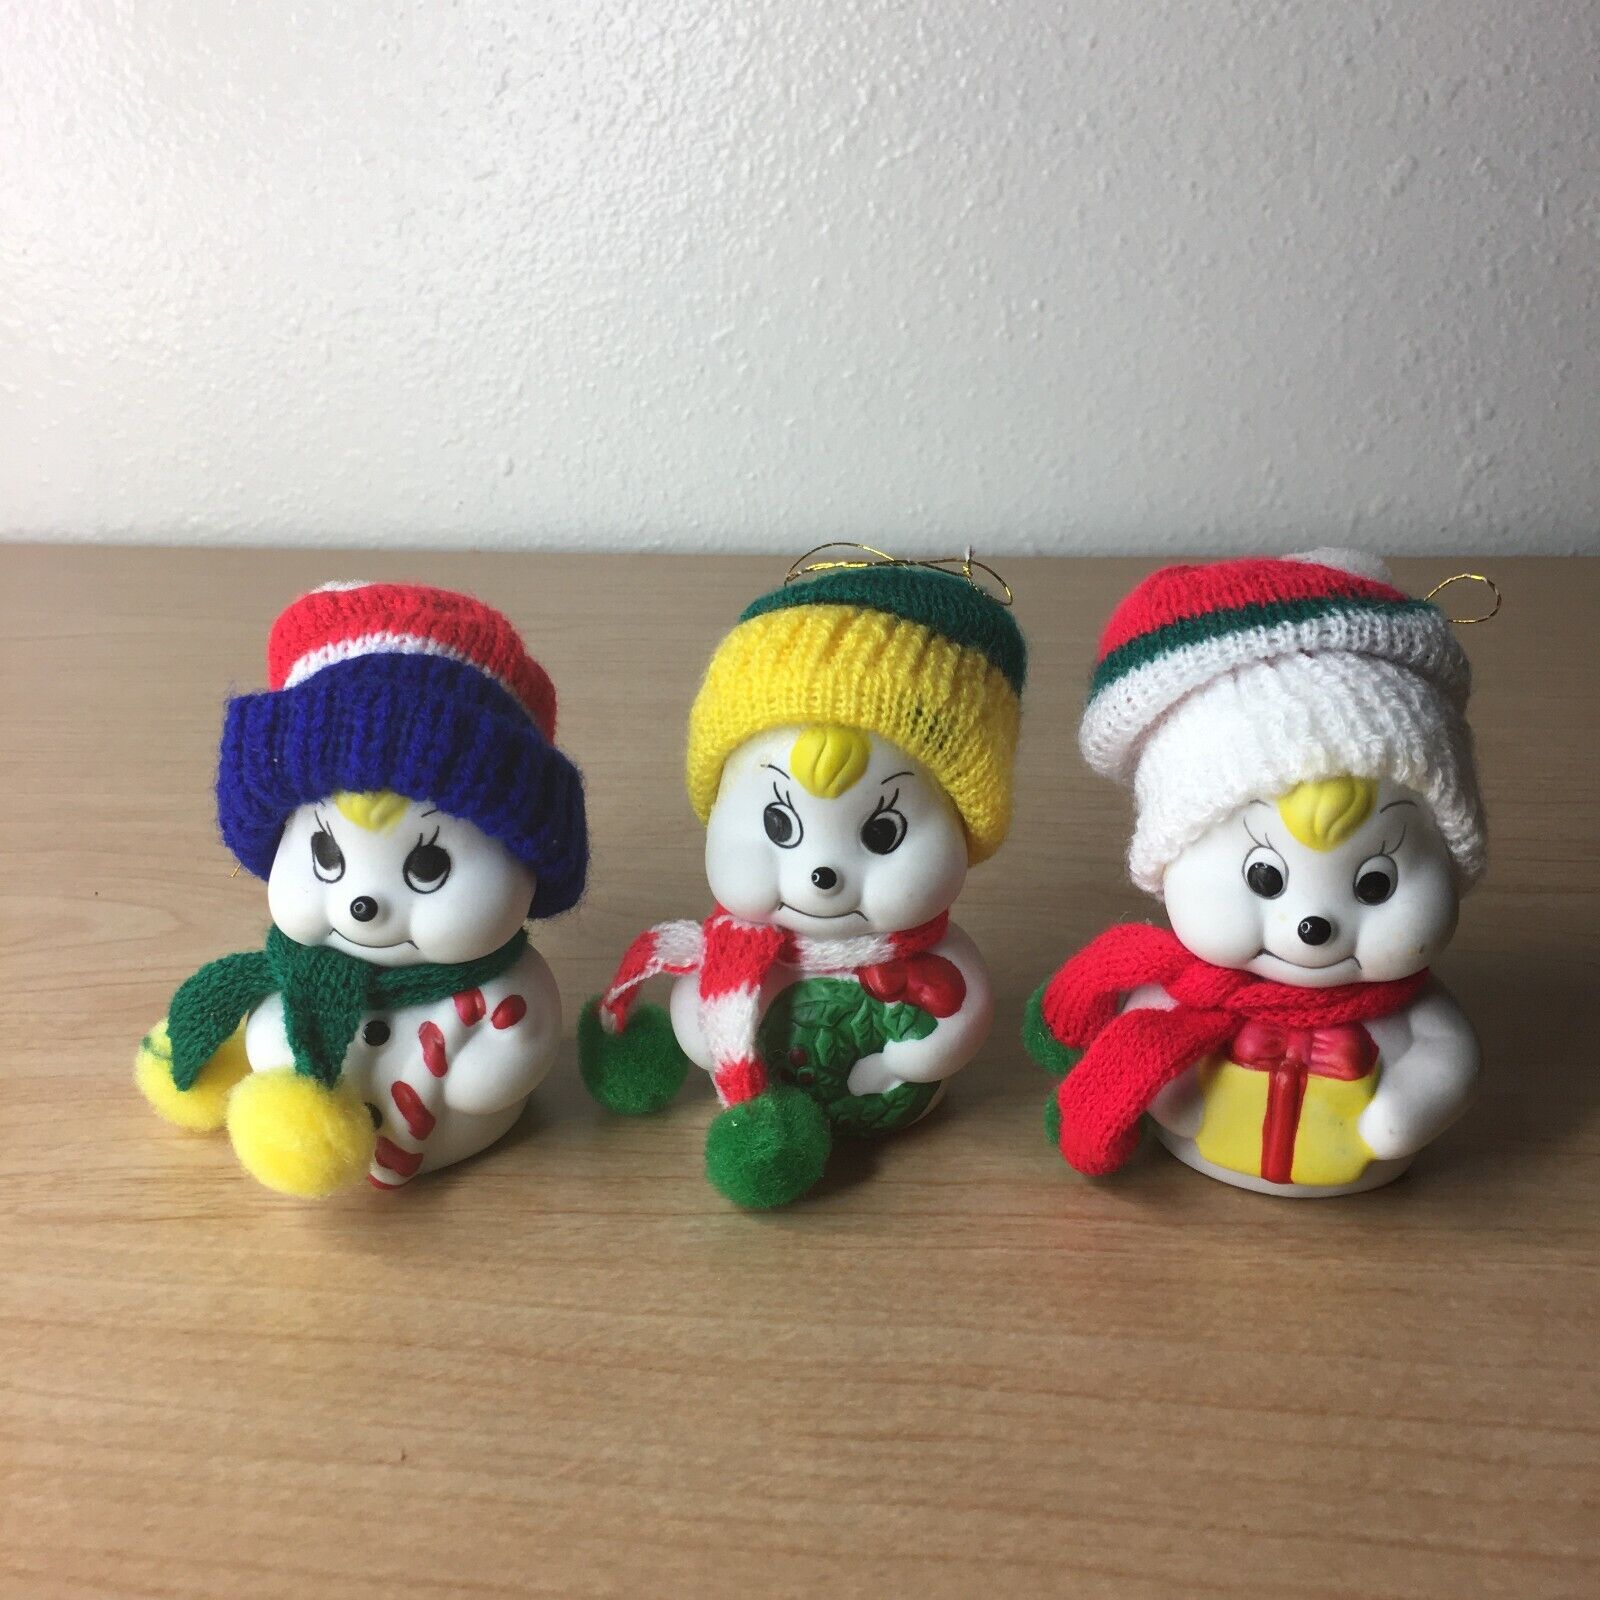 Vintage 1987 Giftco Snowman Porcelain Bell Christmas Tree Ornaments Set of 3